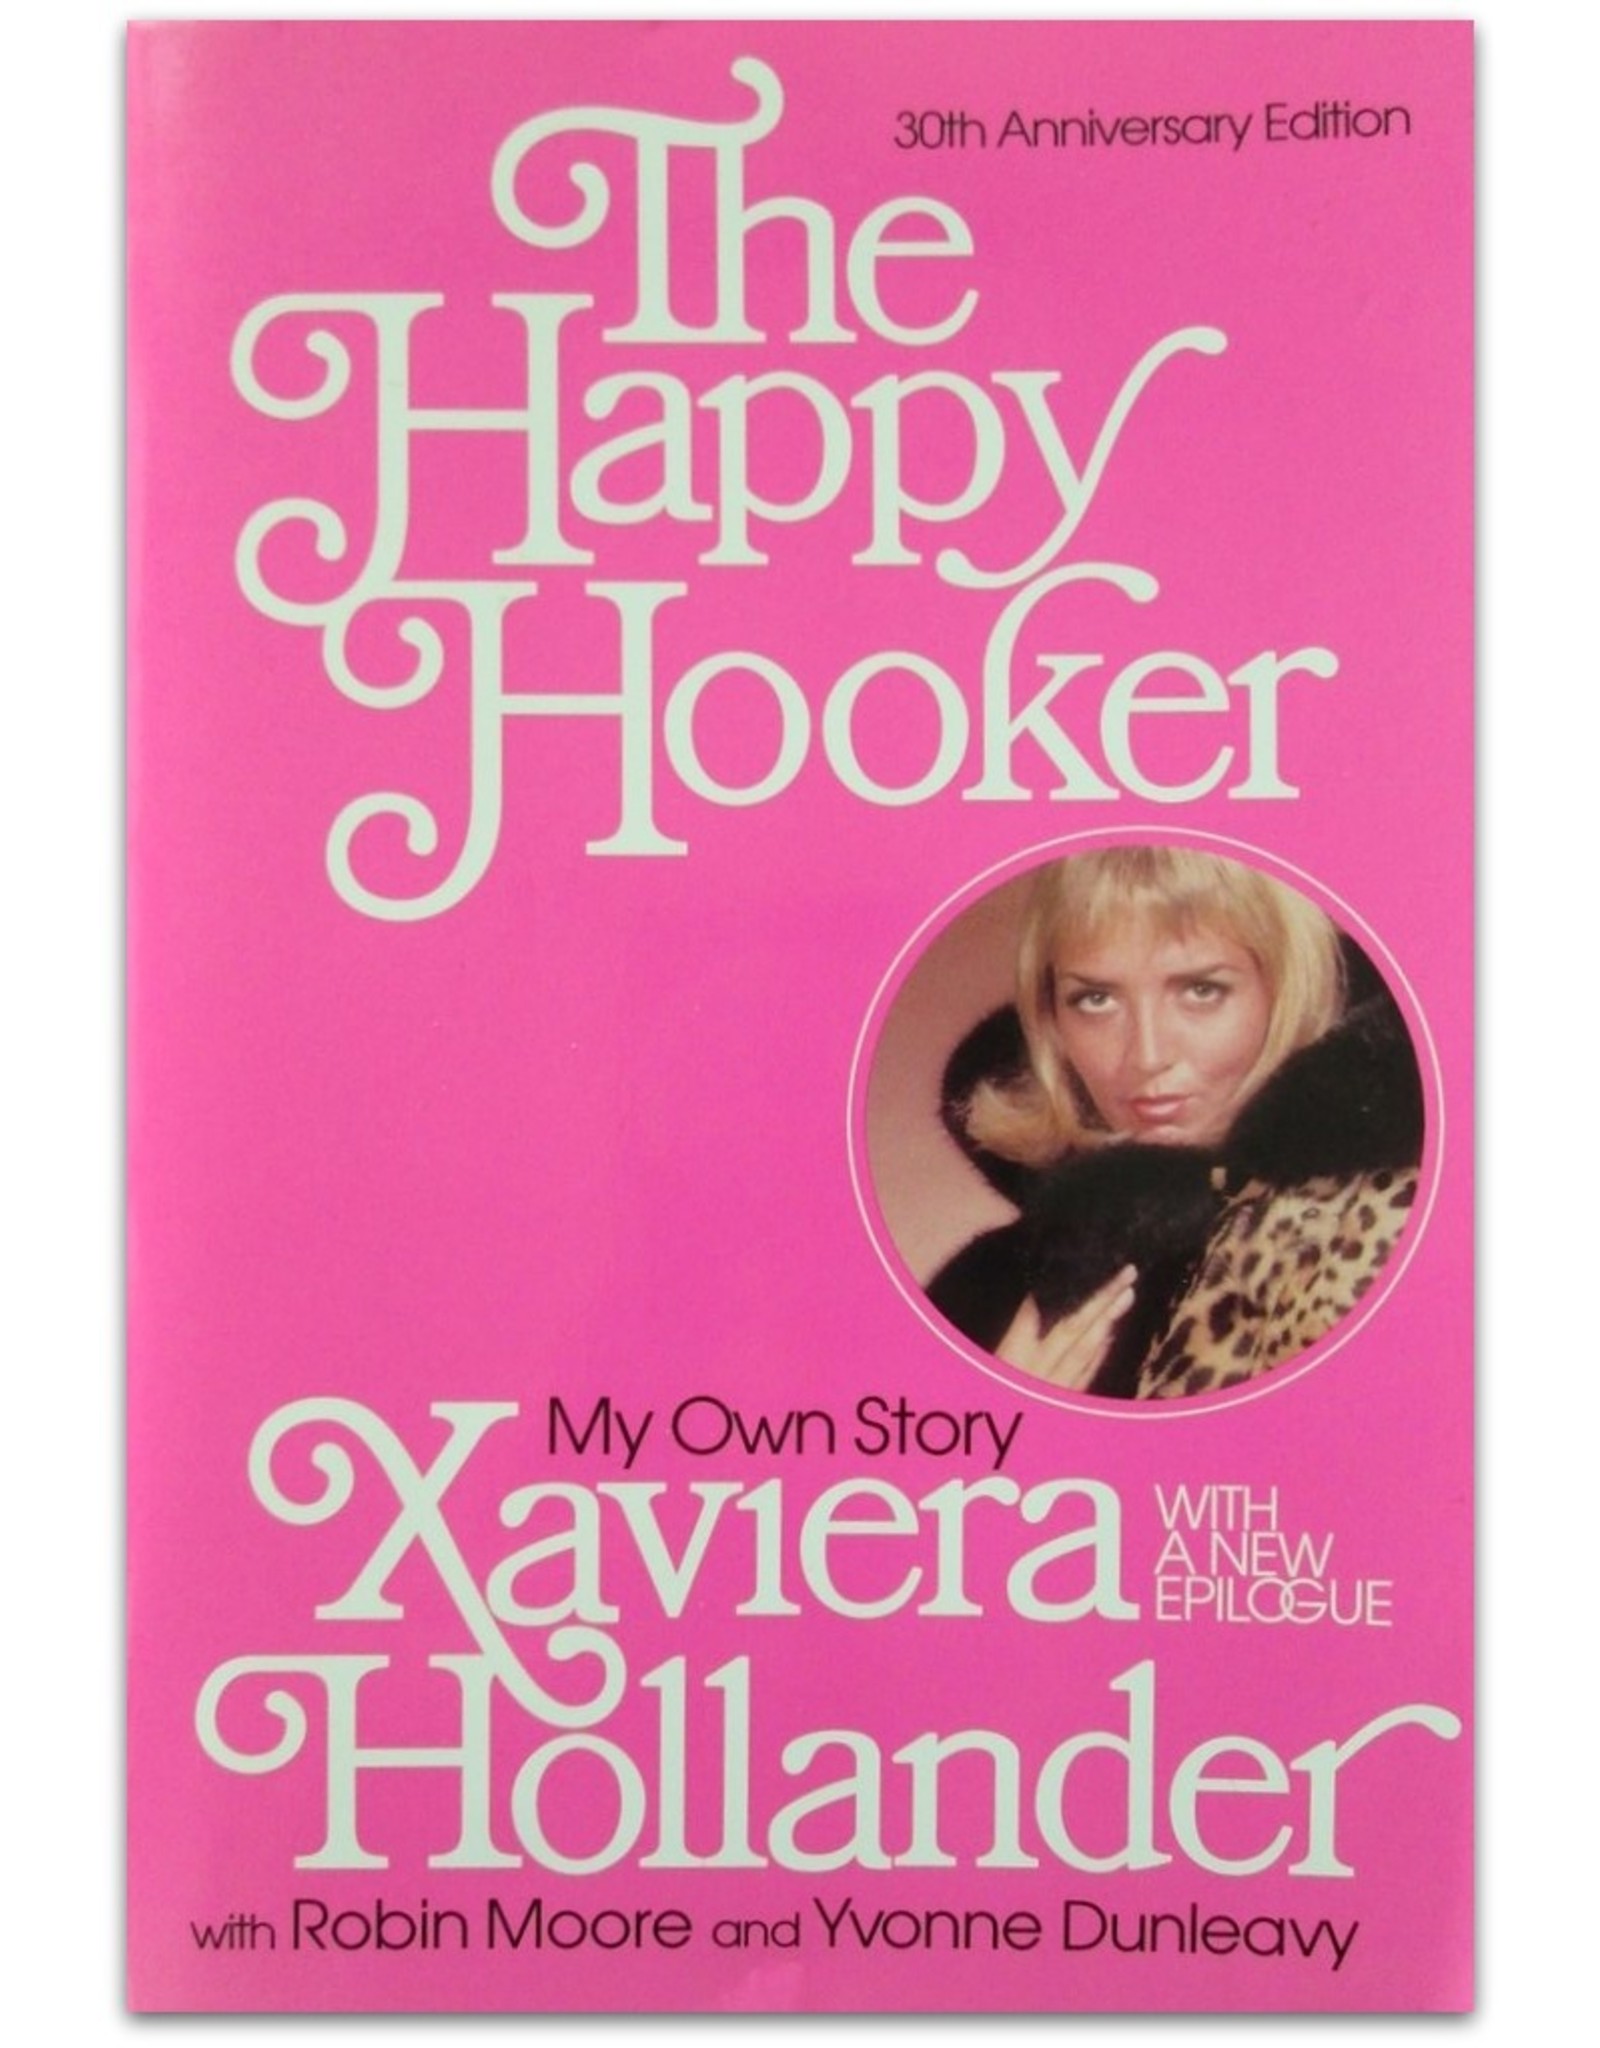 Xaviera Hollander - The Happy Hooker: My Own Story. With Robin Moore en Ivan Donleavy. 30th Anniversary Edition with a New Epilogue.